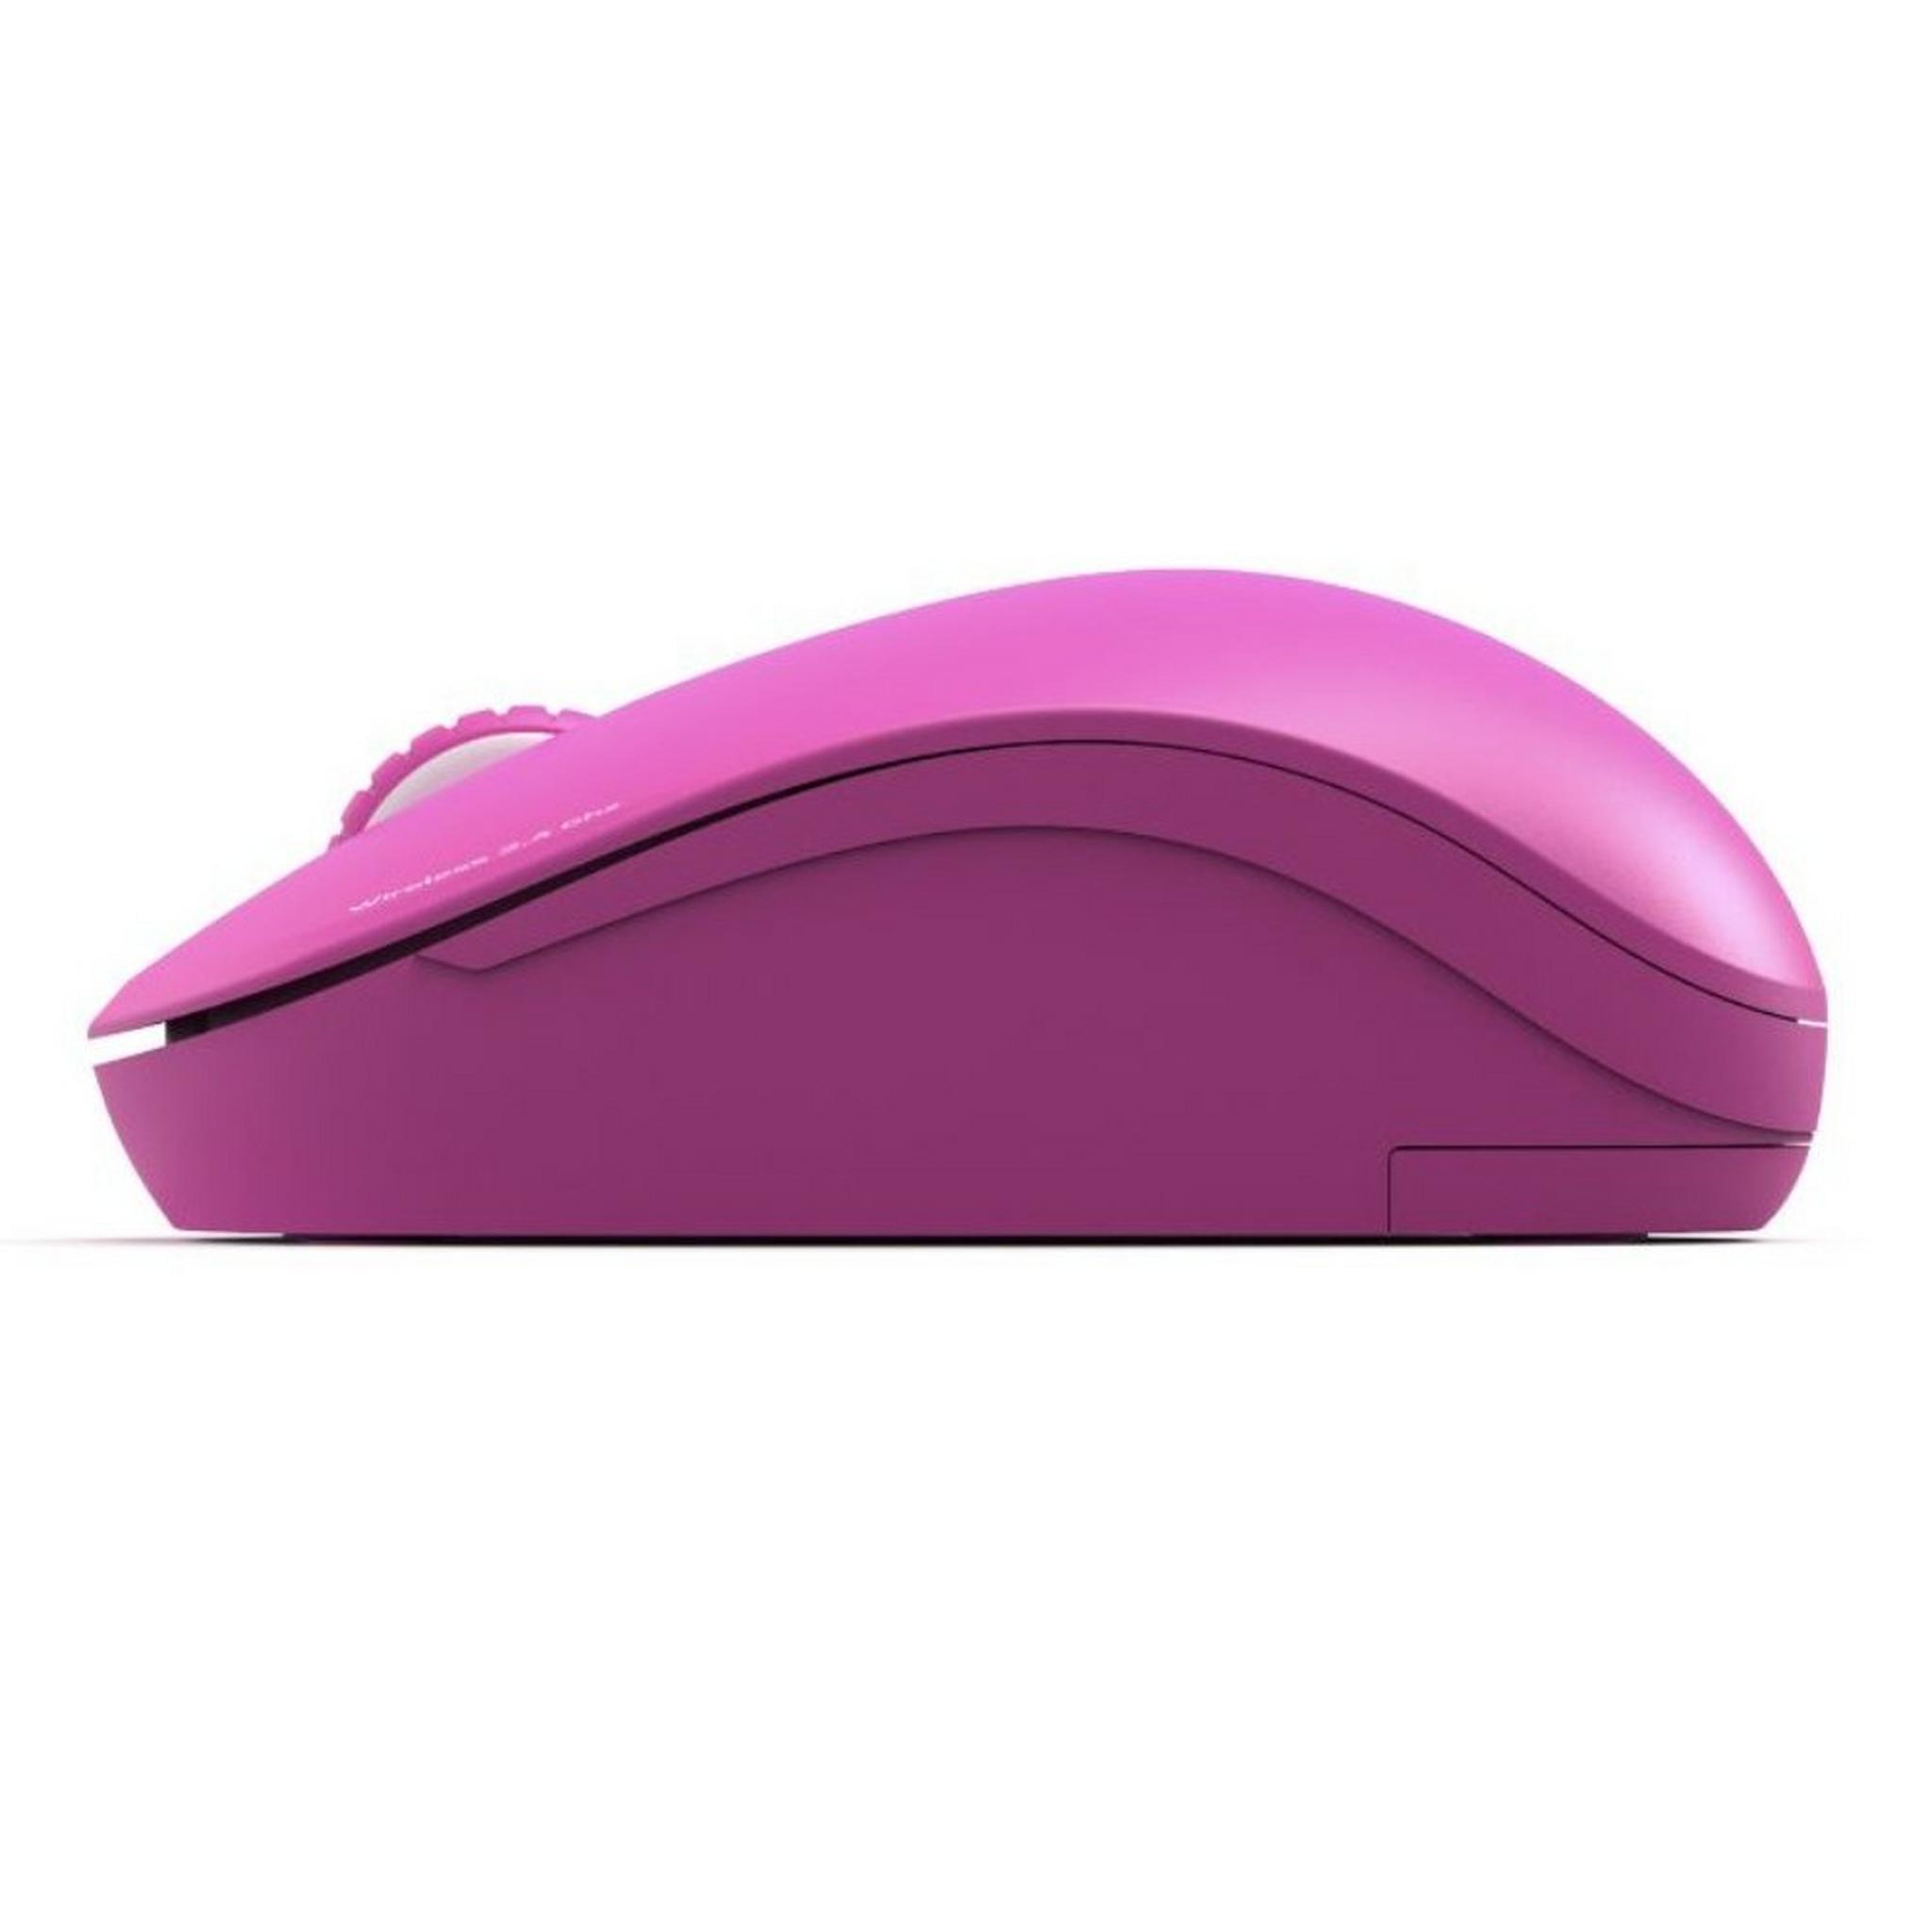 Port Mouse Collection Wireless - Fuchsia (900538)